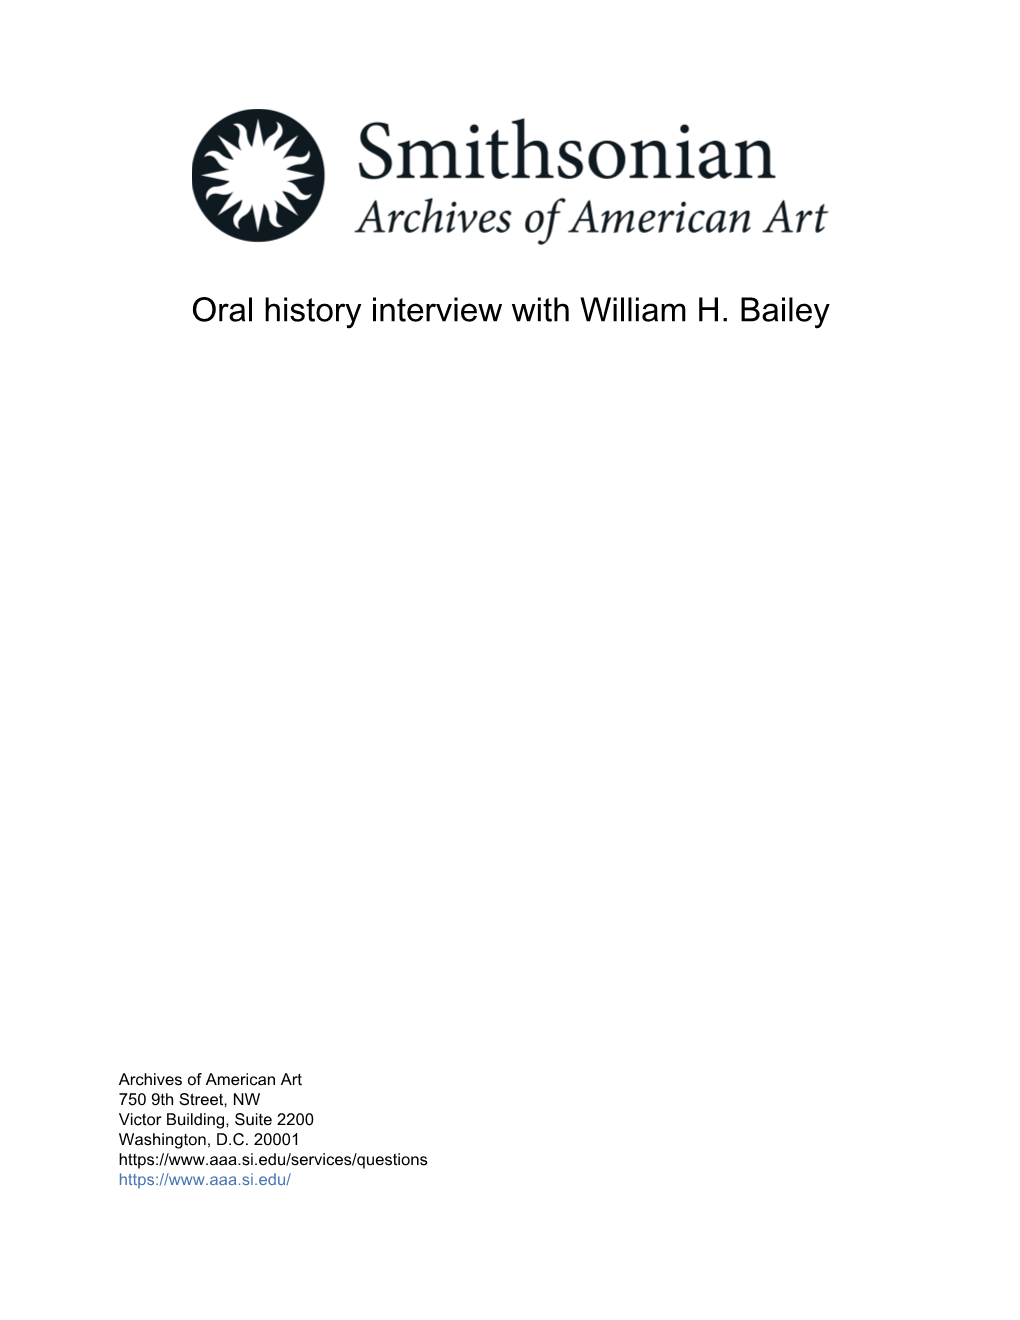 Oral History Interview with William H. Bailey